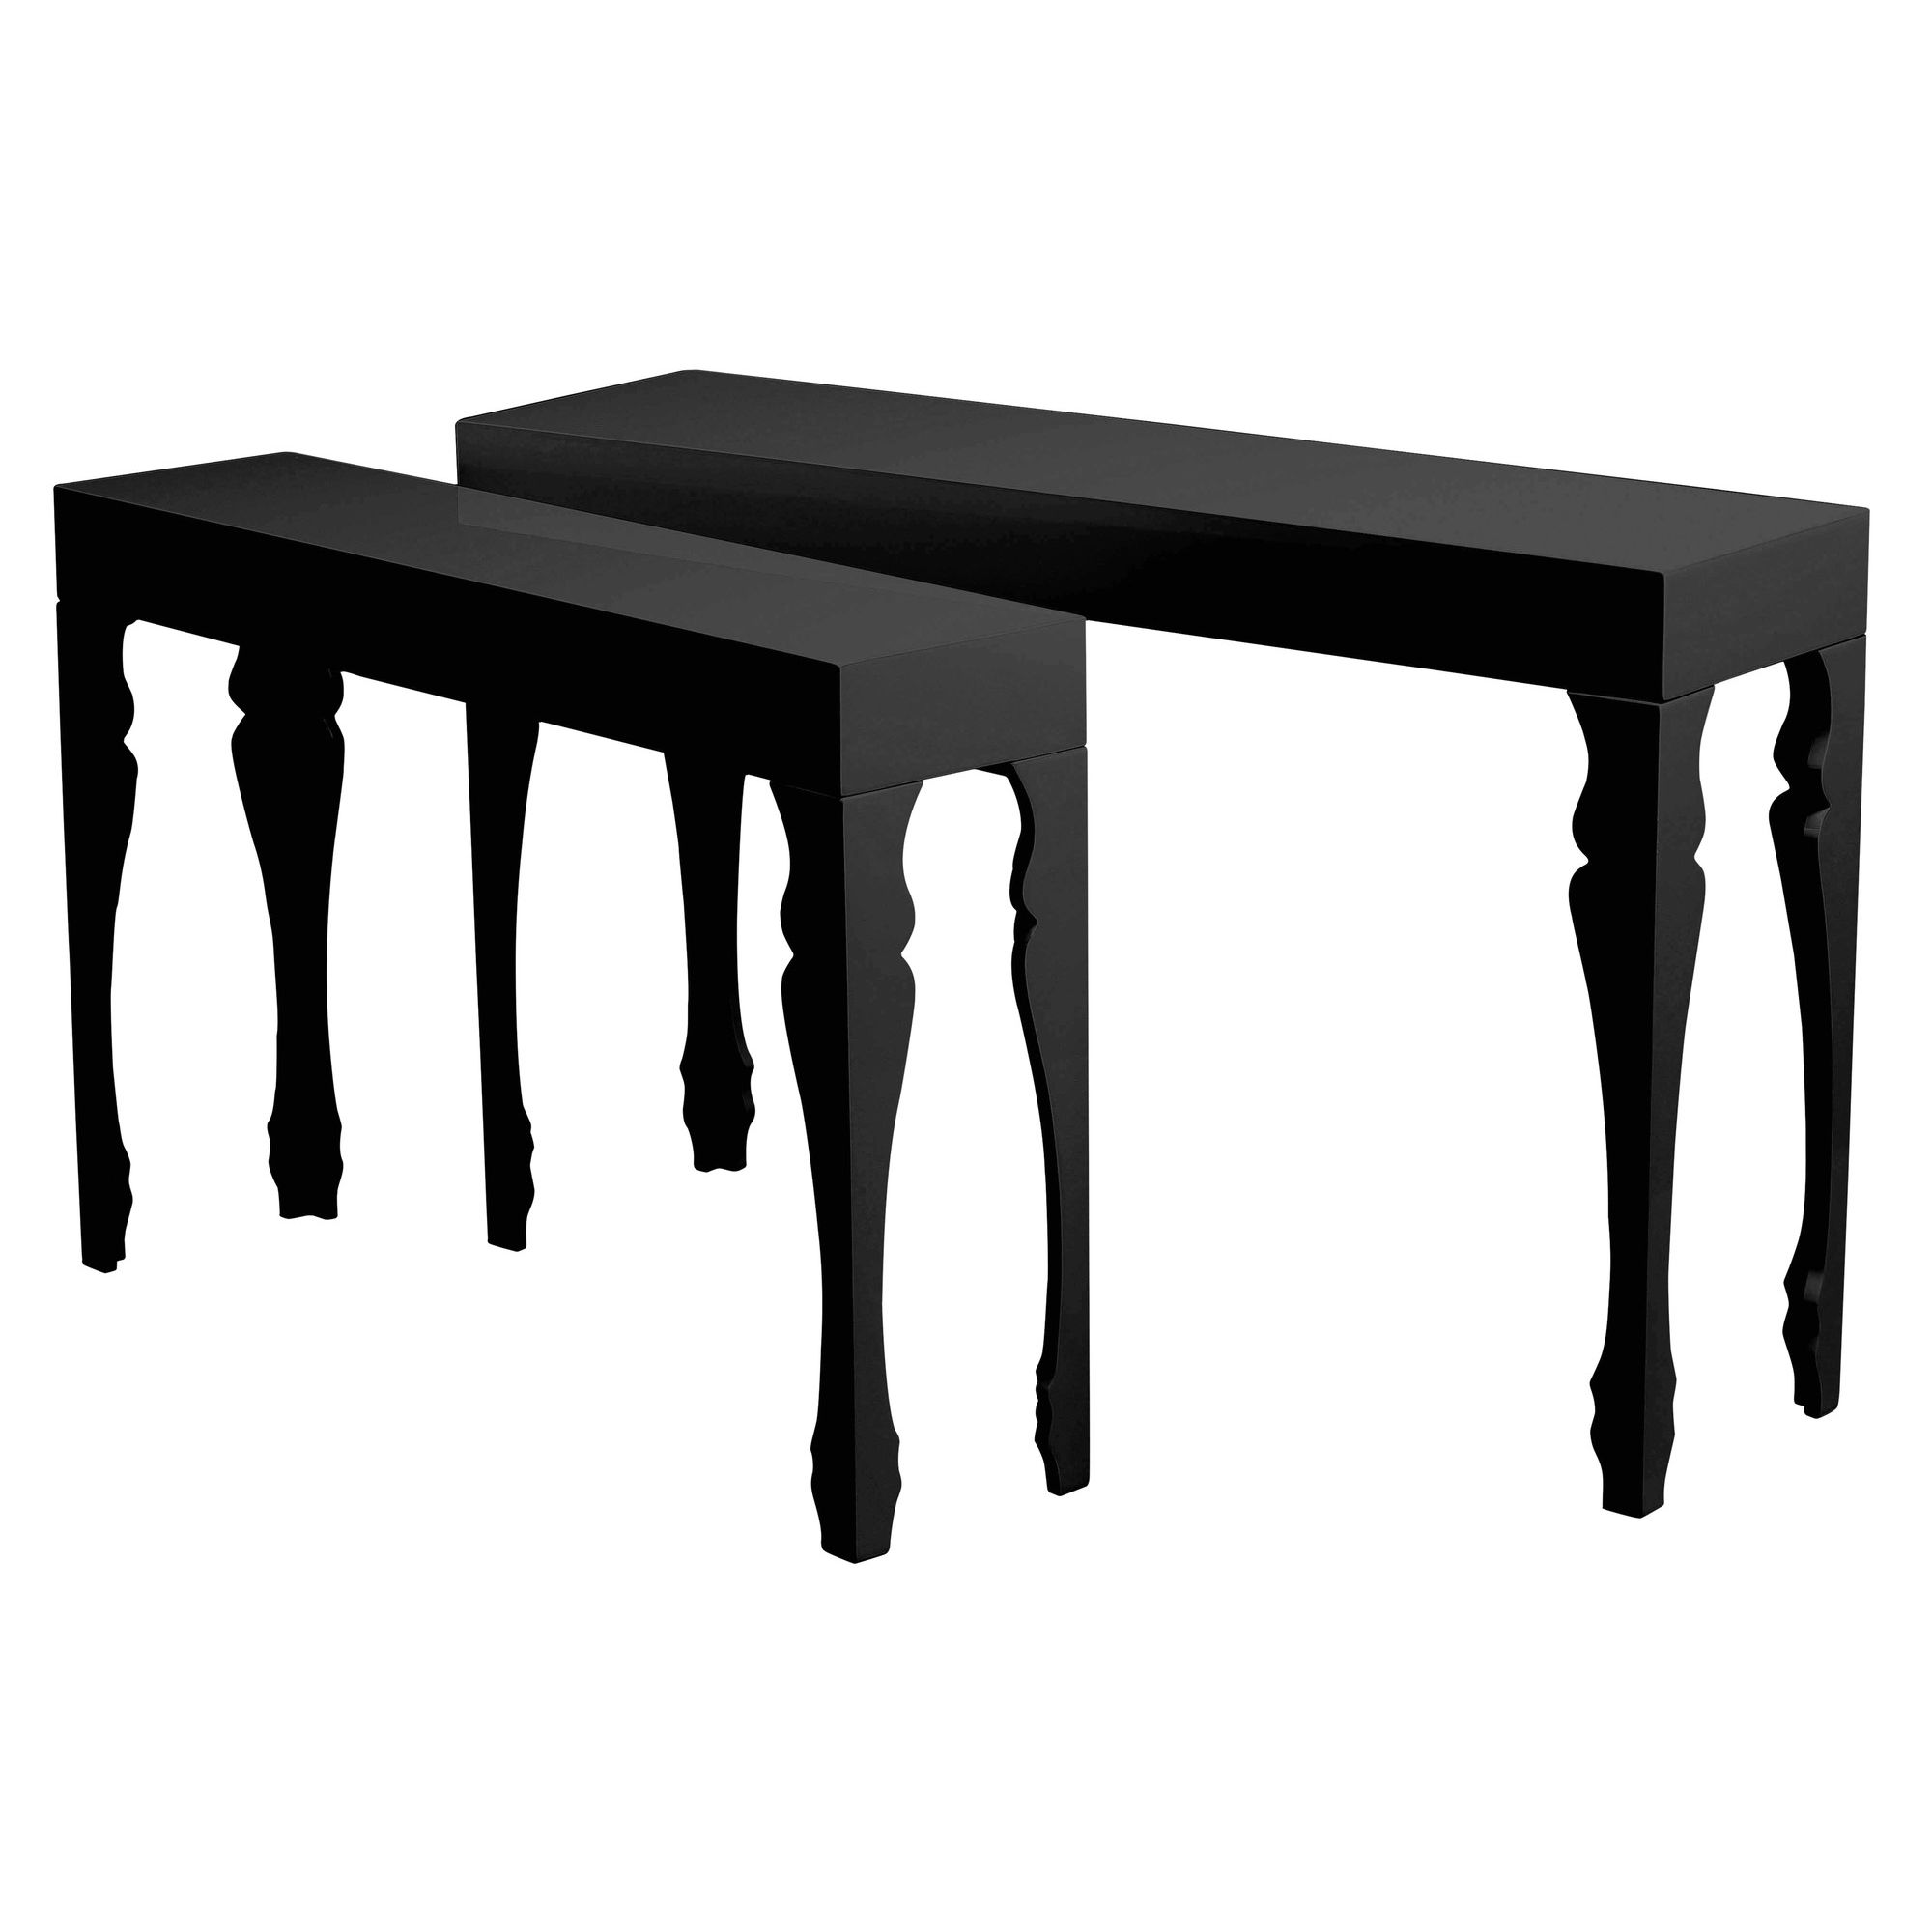 Premier Housewares Luis Accent Tables (Set of 2) - Black High Gloss at Tescos Direct